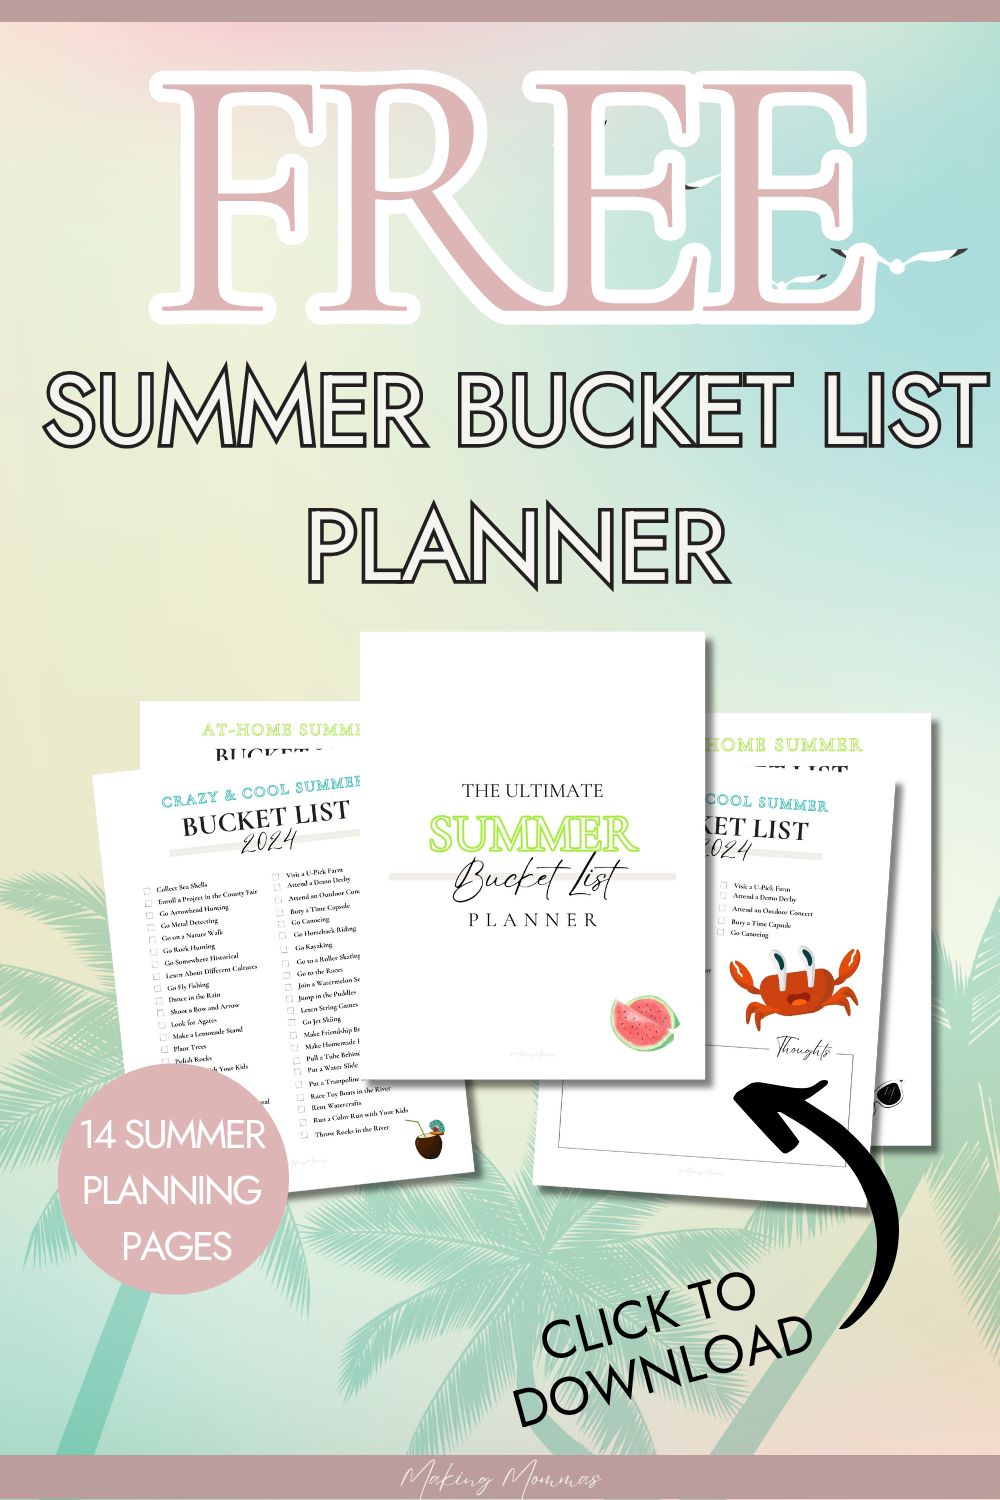 pin image reading, "Free summer bucket list planner" with an image of the planner pages on a palm tree background